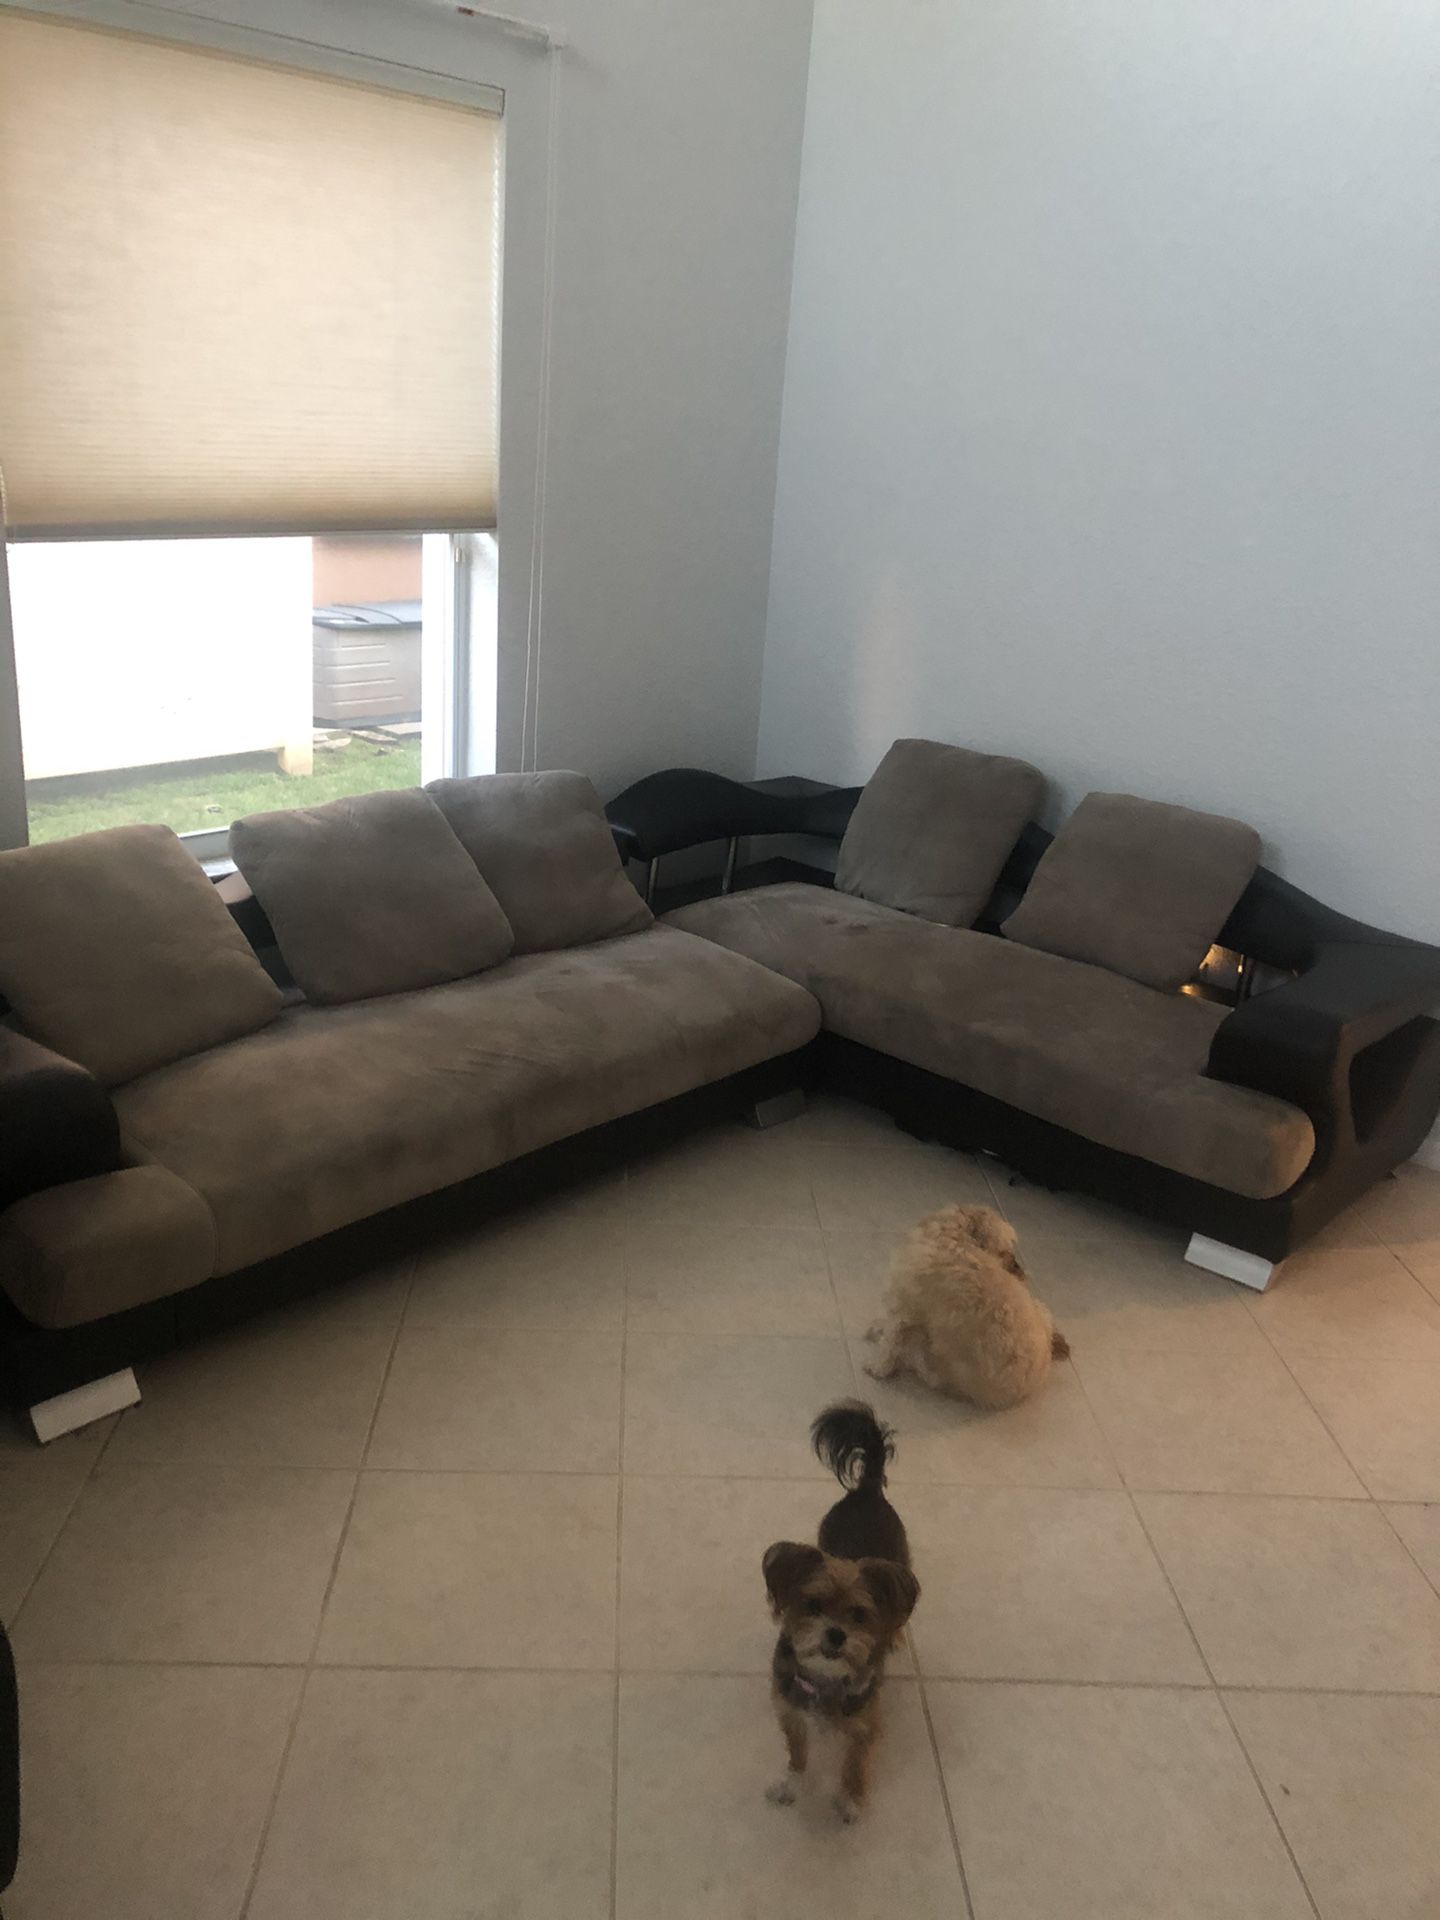 Modern leather grey black sectional